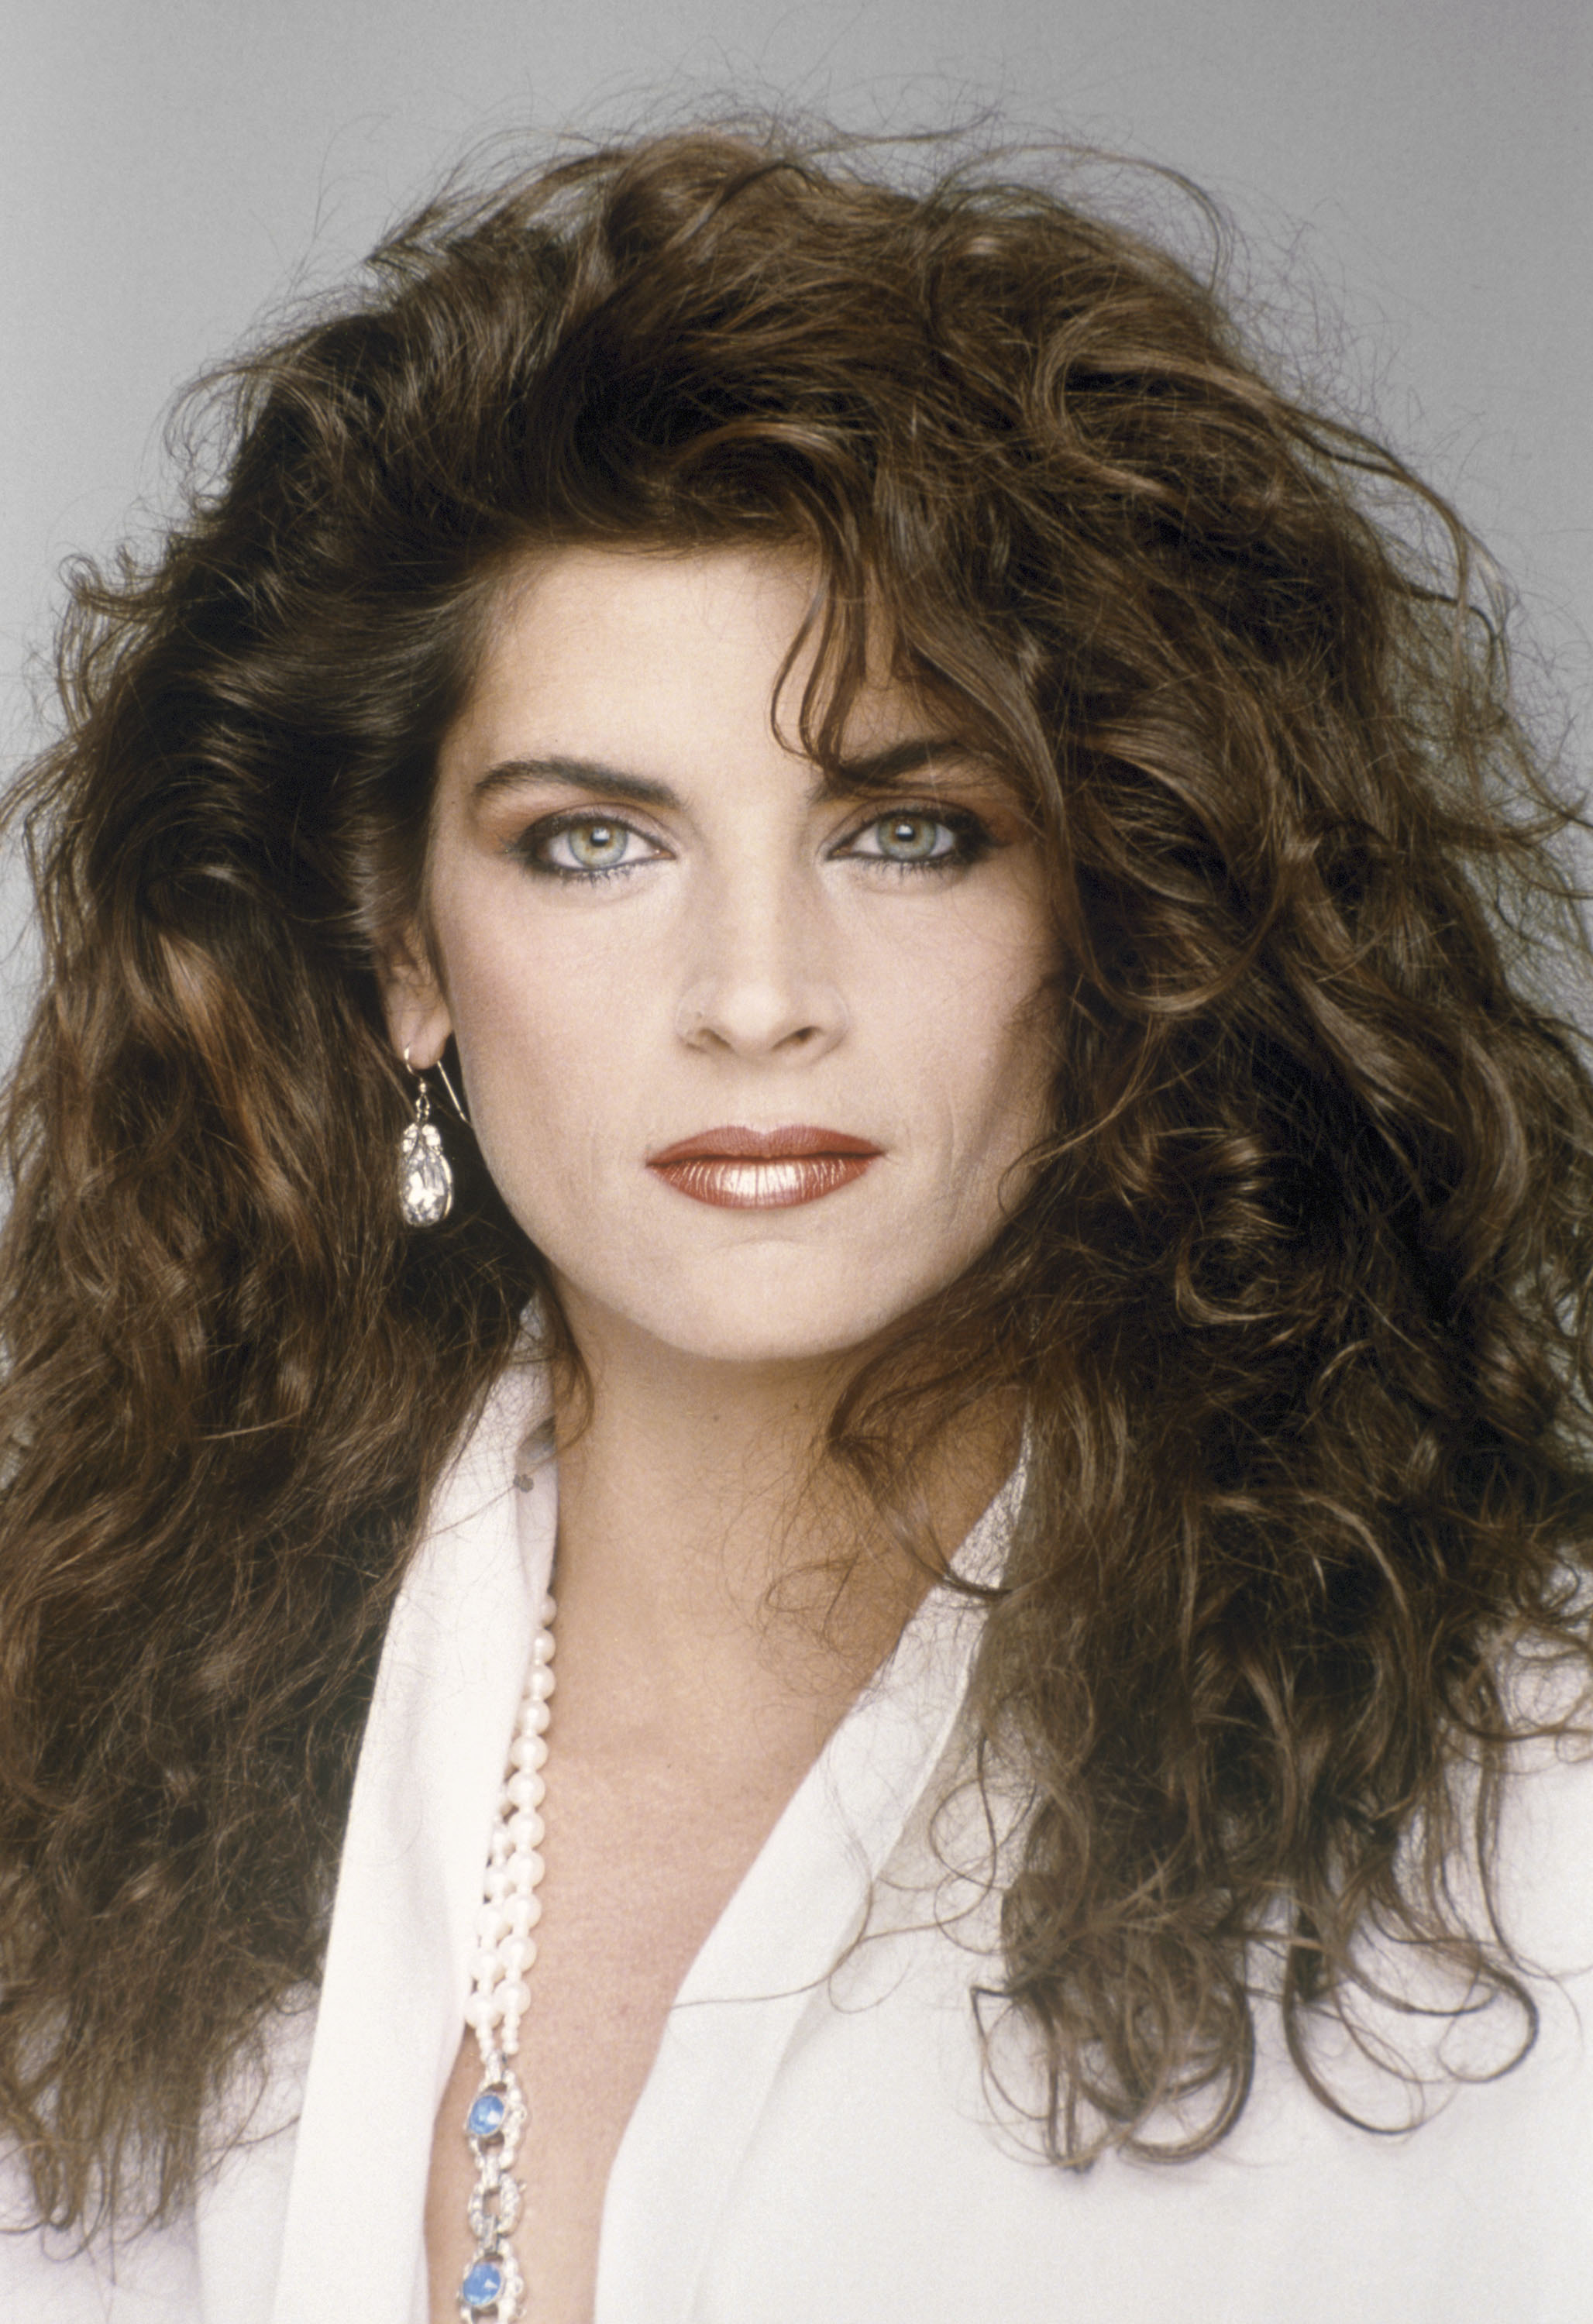 Kirstie Alley would have been 72 today: Look back at stunning photo of the actress early in her career